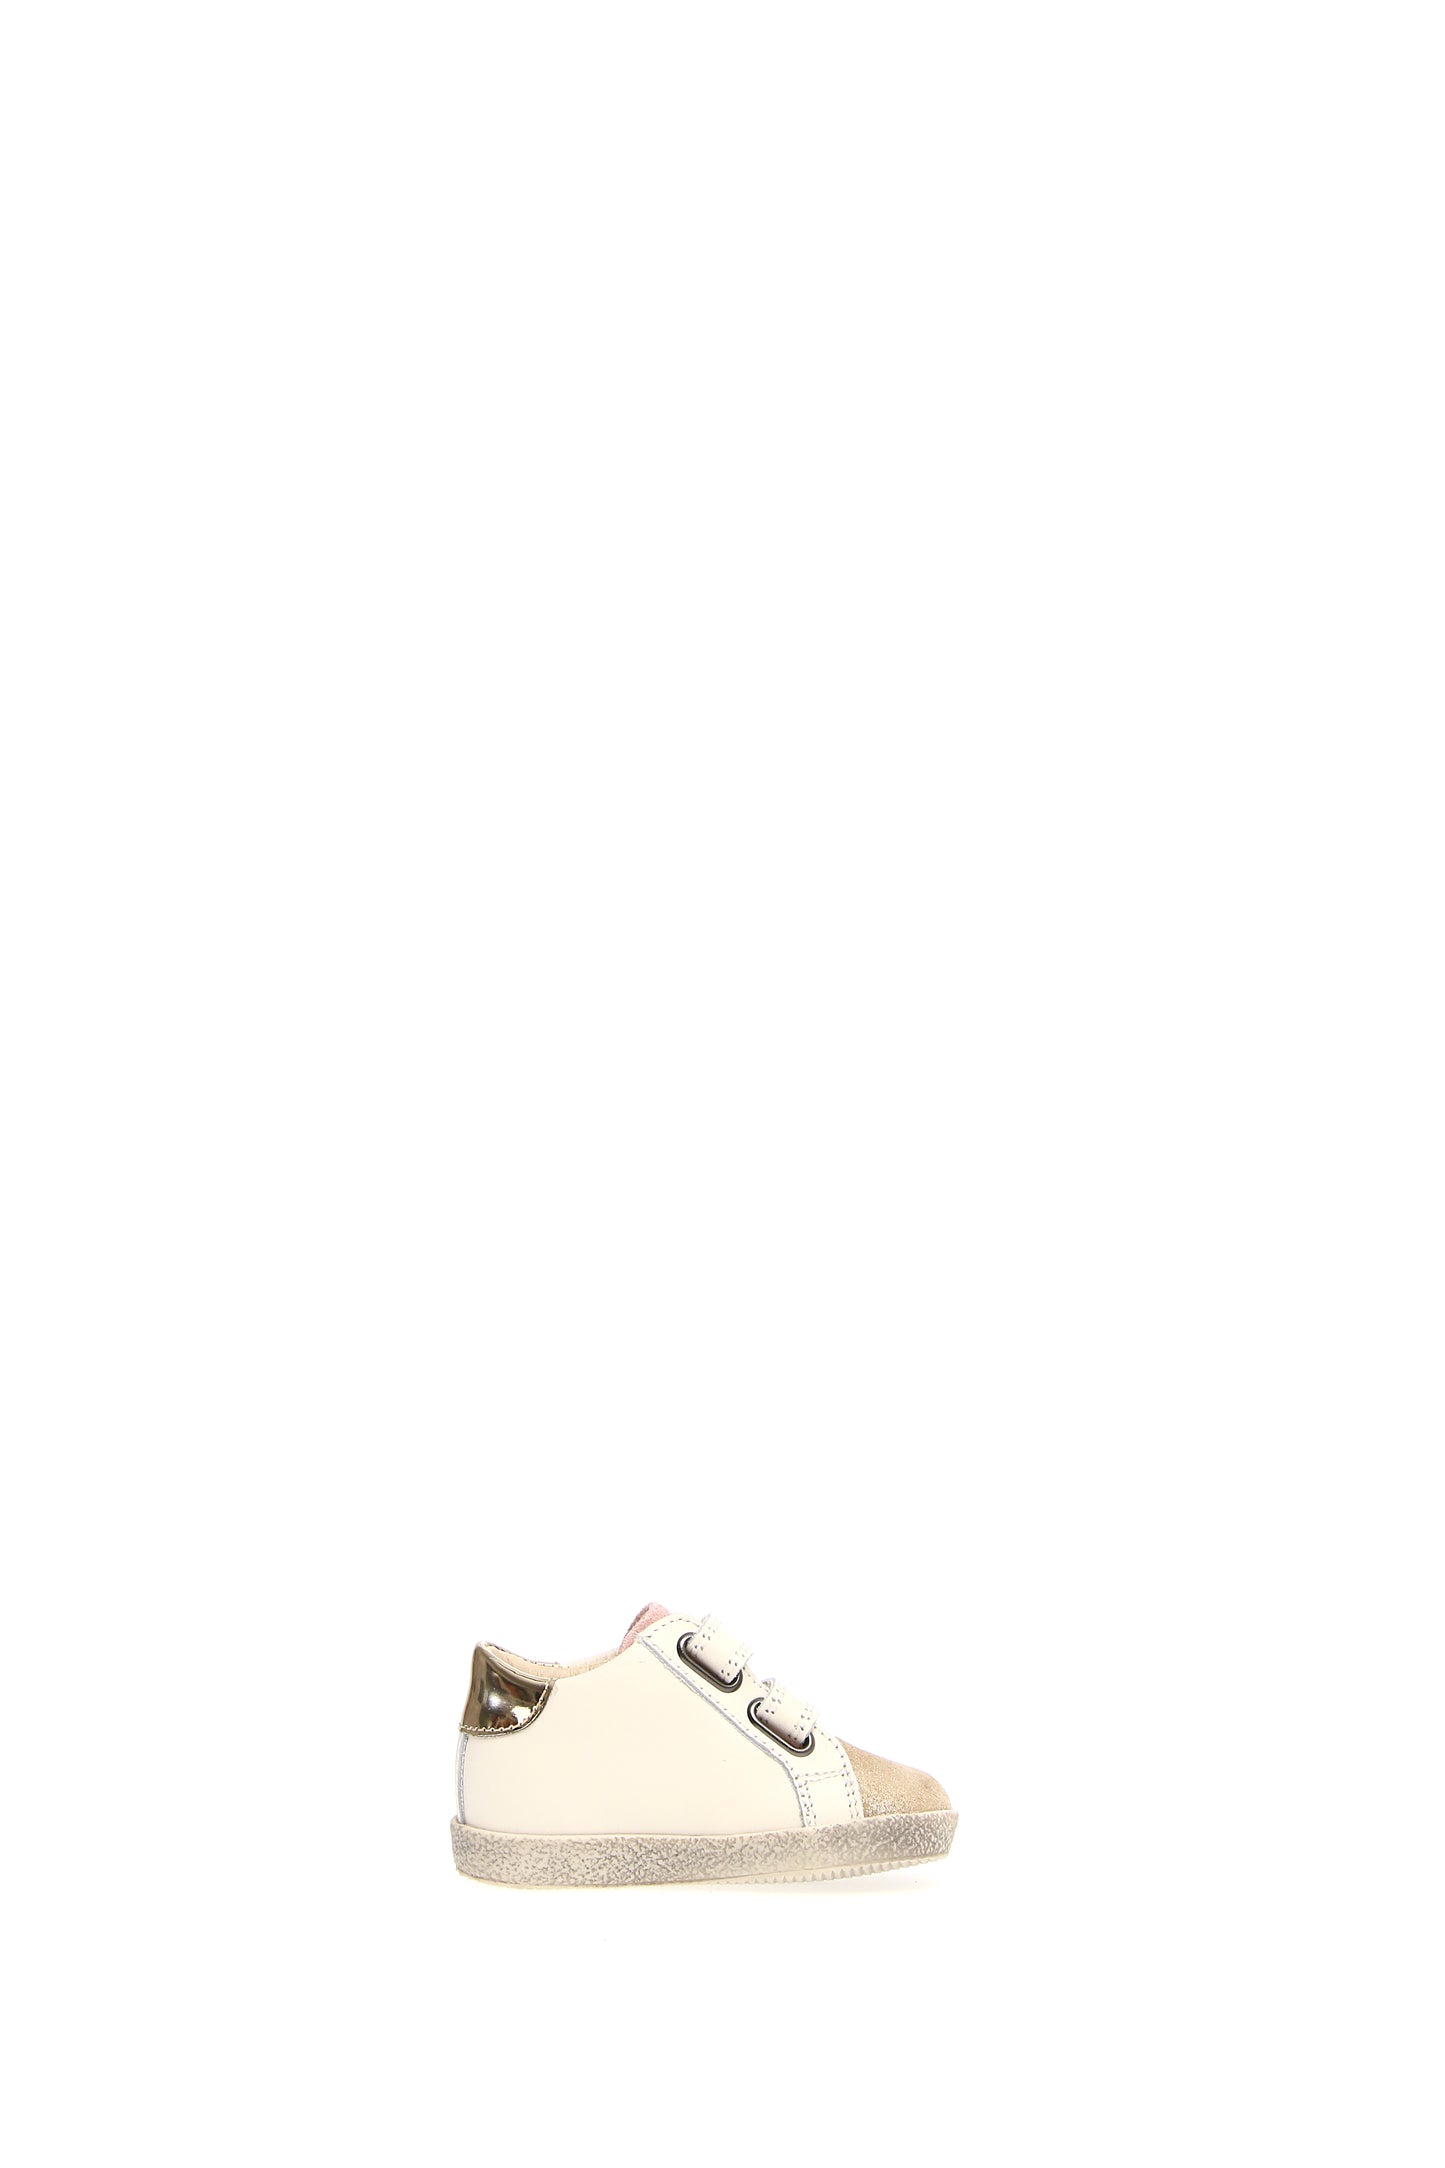 Falcotto Girls Ivory & Glitter Leather Trainers